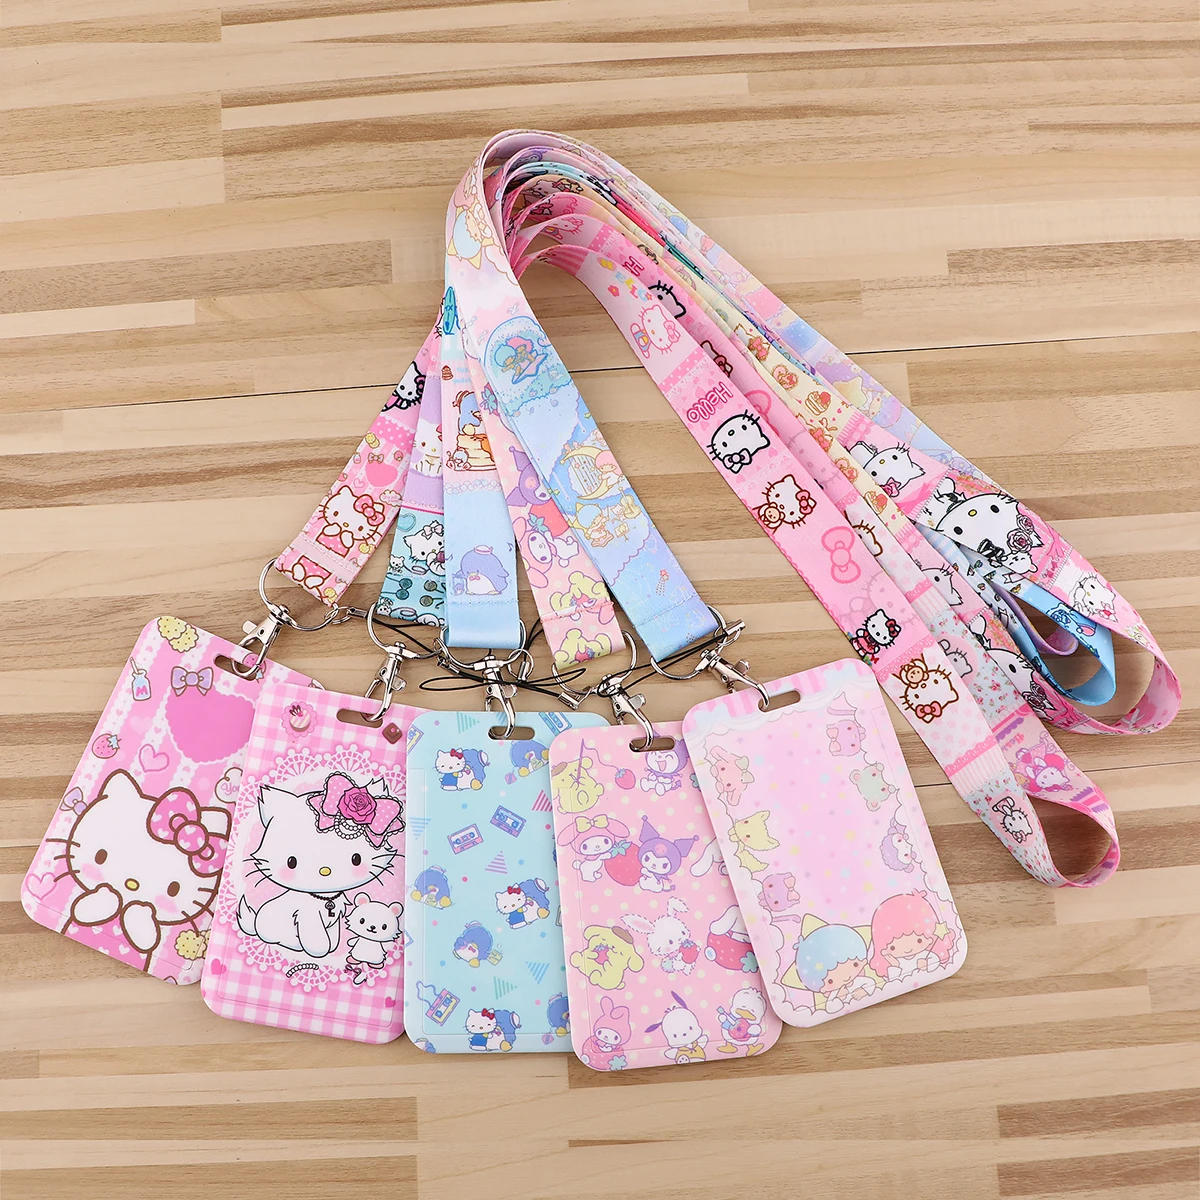 Rabbit Keychain Kawaii Cat Cartoon Anime Lanyards for Key ID Card Gym Cell Phone Strap USB Badge Holder Accessories Gift flowers lanyards for key creative neck strap for card badge gym keychain lanyard key holder diy hanging rope phone strap